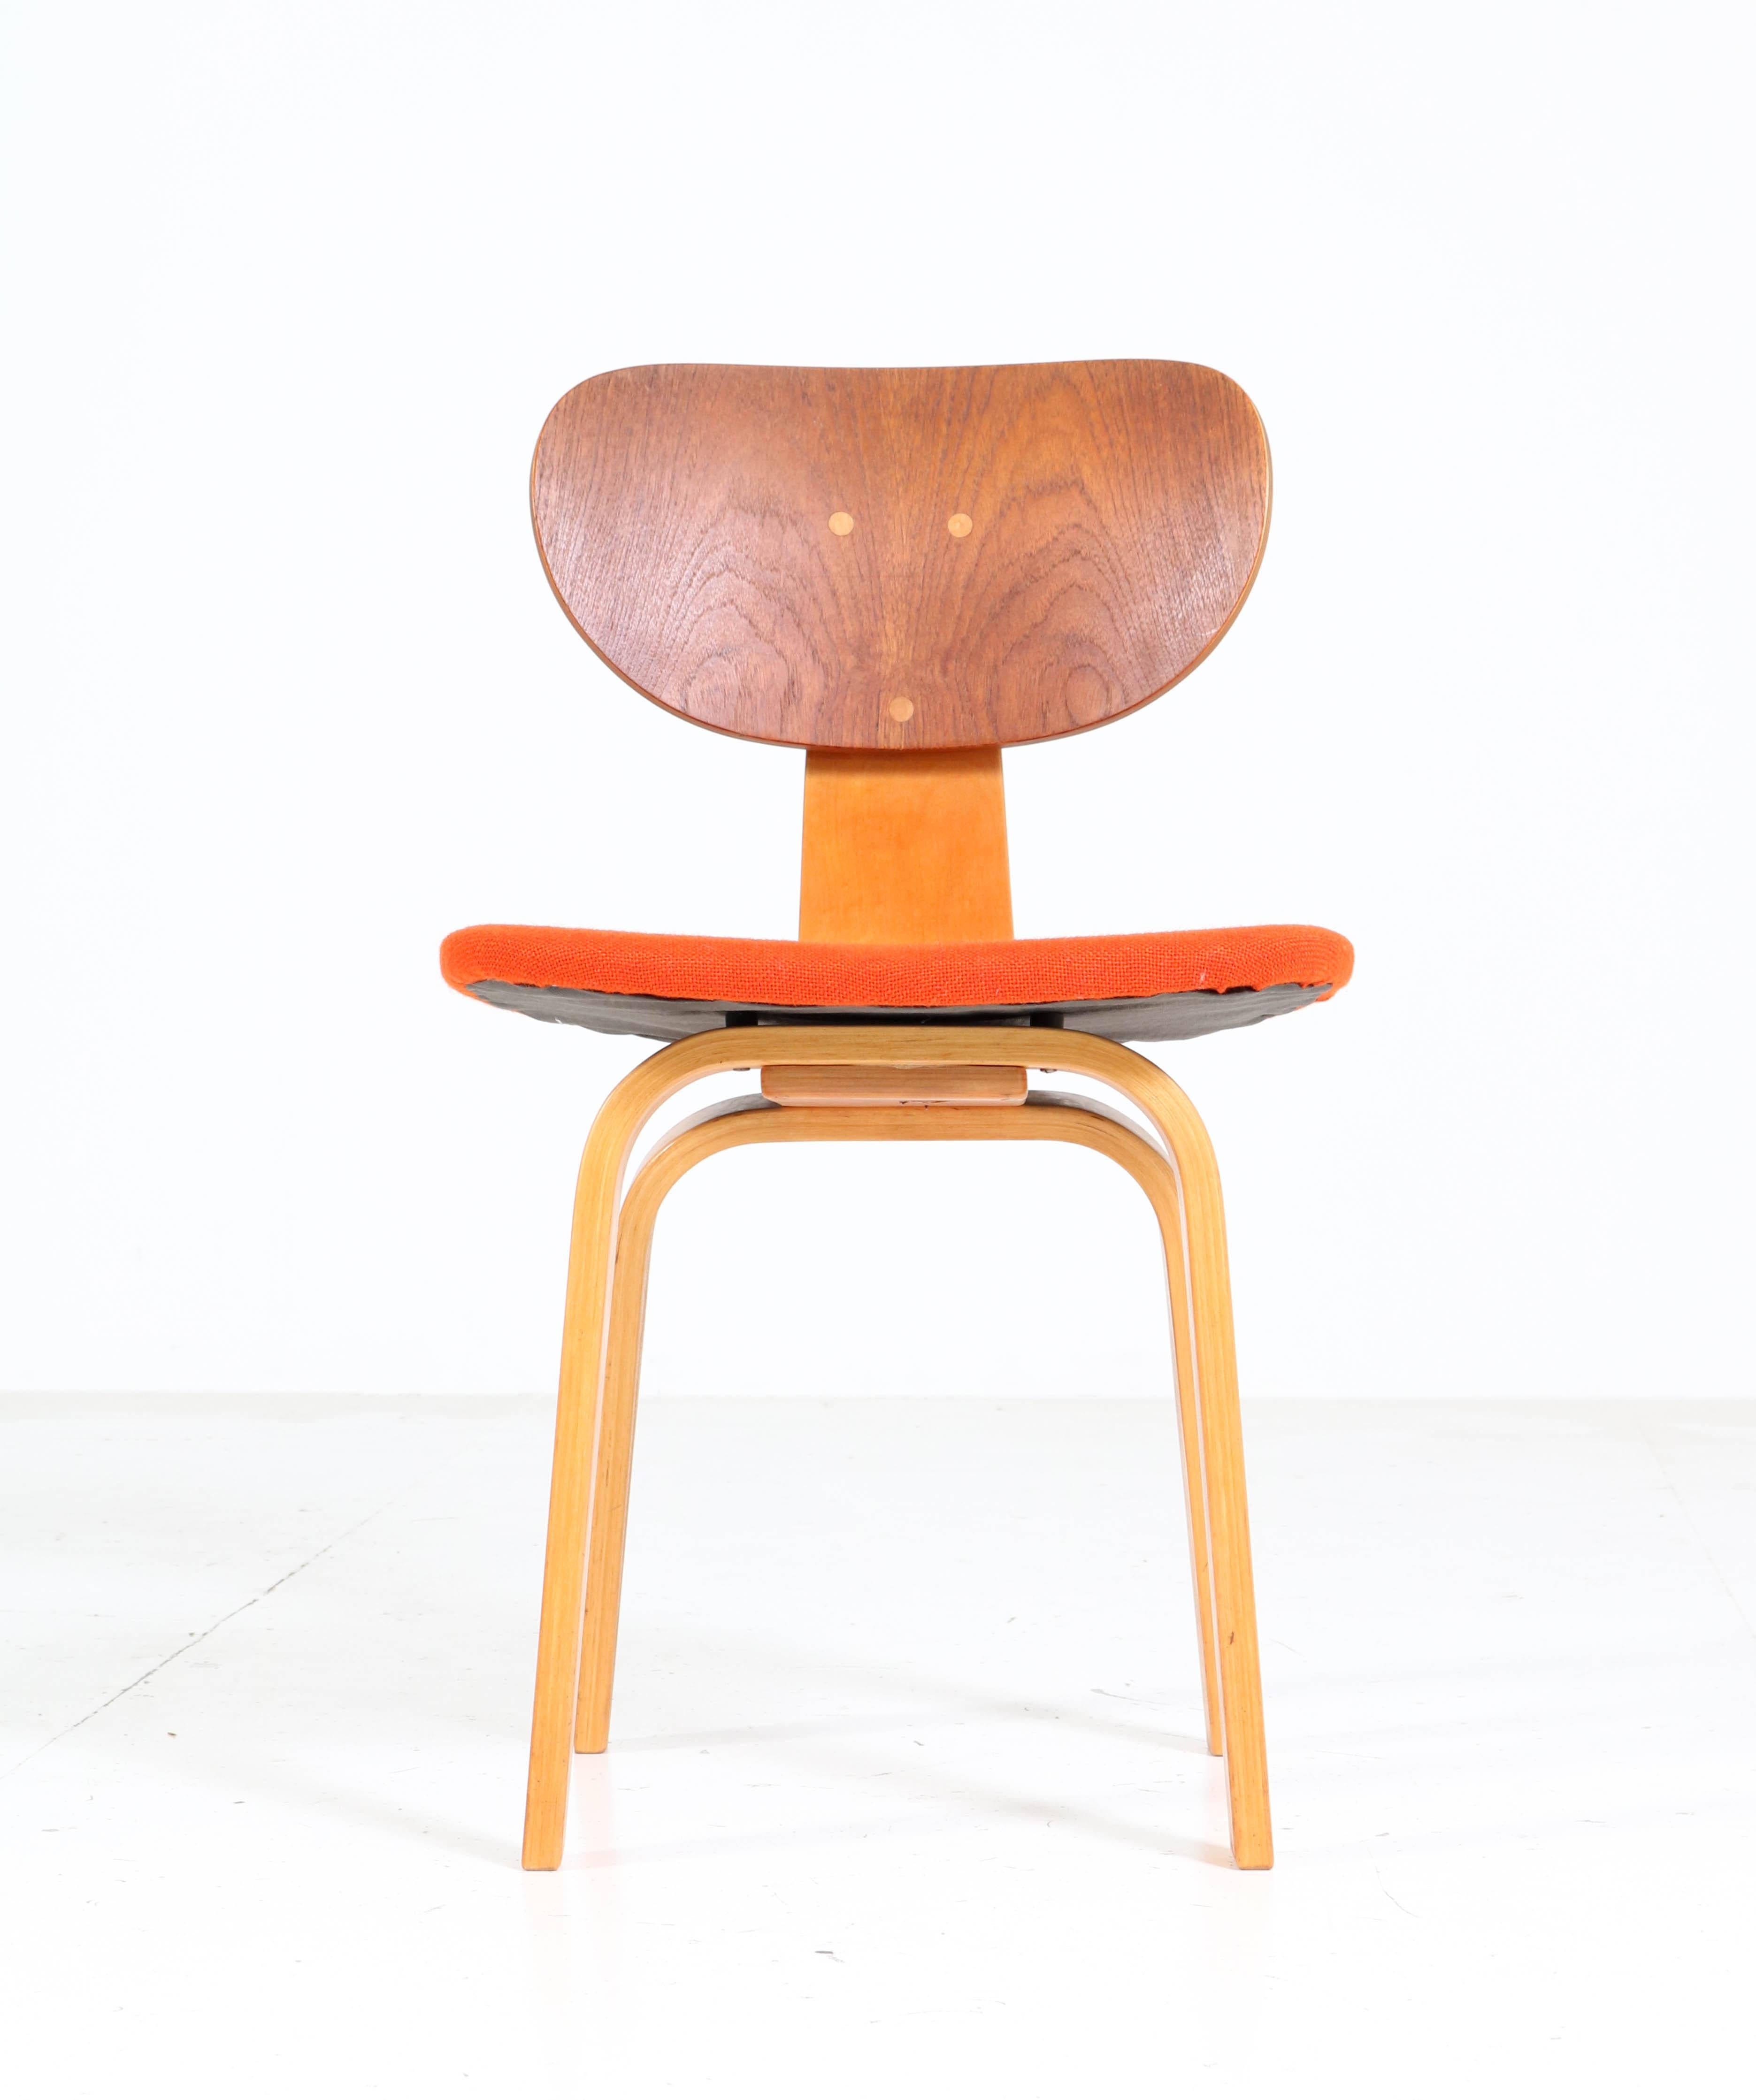 Birch and Teak Mid-Century Modern Sb02 Chair by Cees Braakman for Pastoe, 1952 4